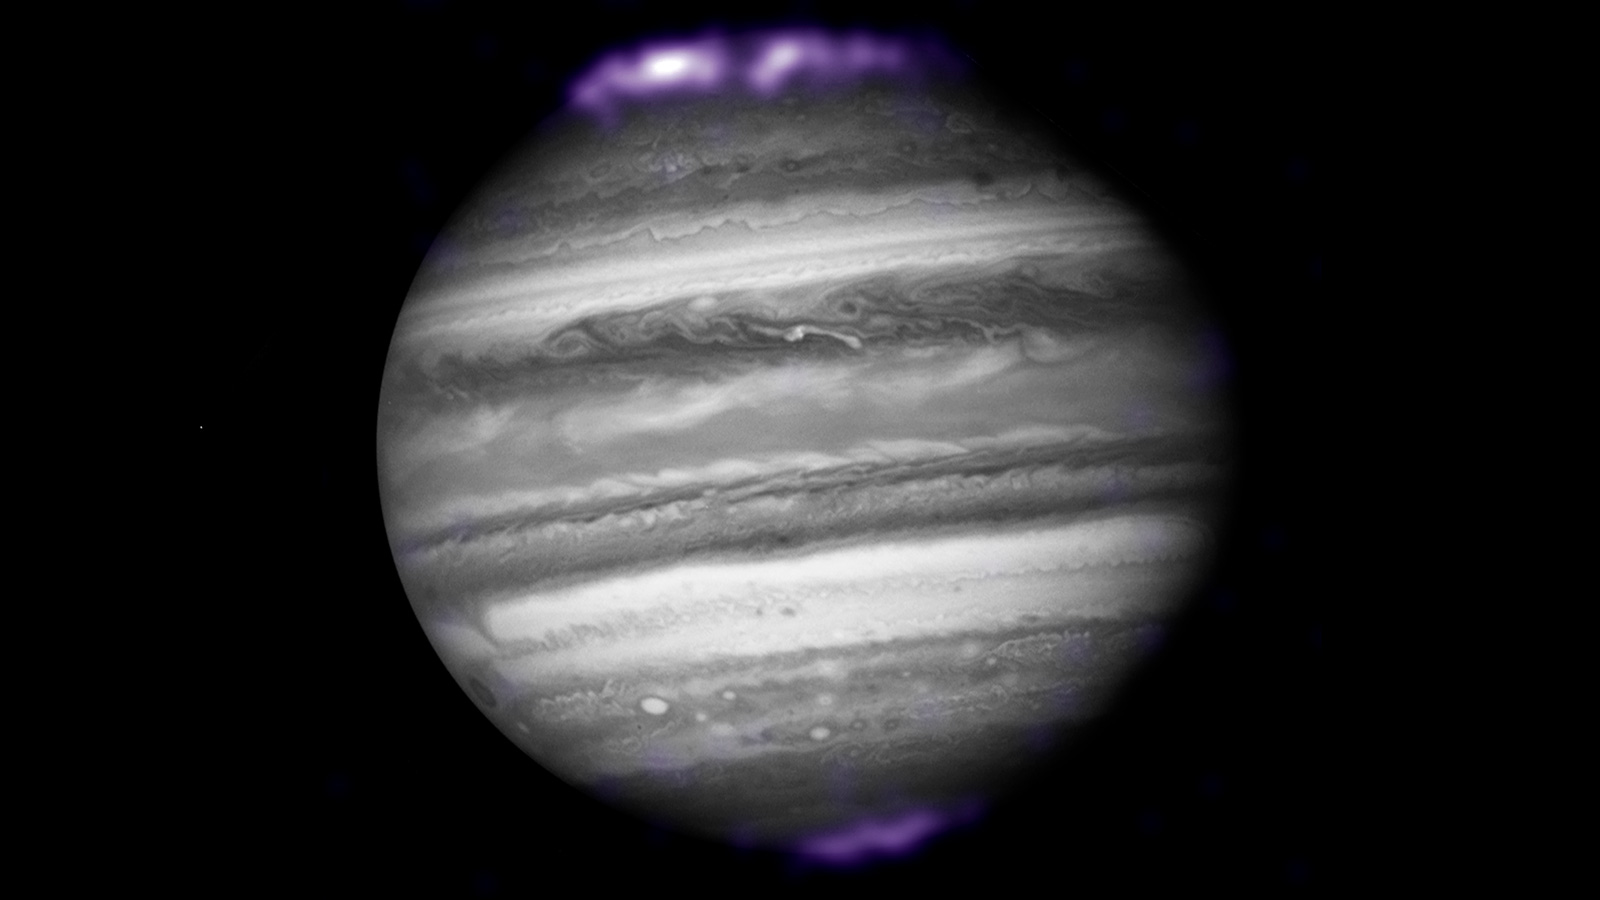 The purple hues in this image show X-ray emissions from Jupiter’s auroras, detected by NASA’s Chandra Space Telescope in 2007